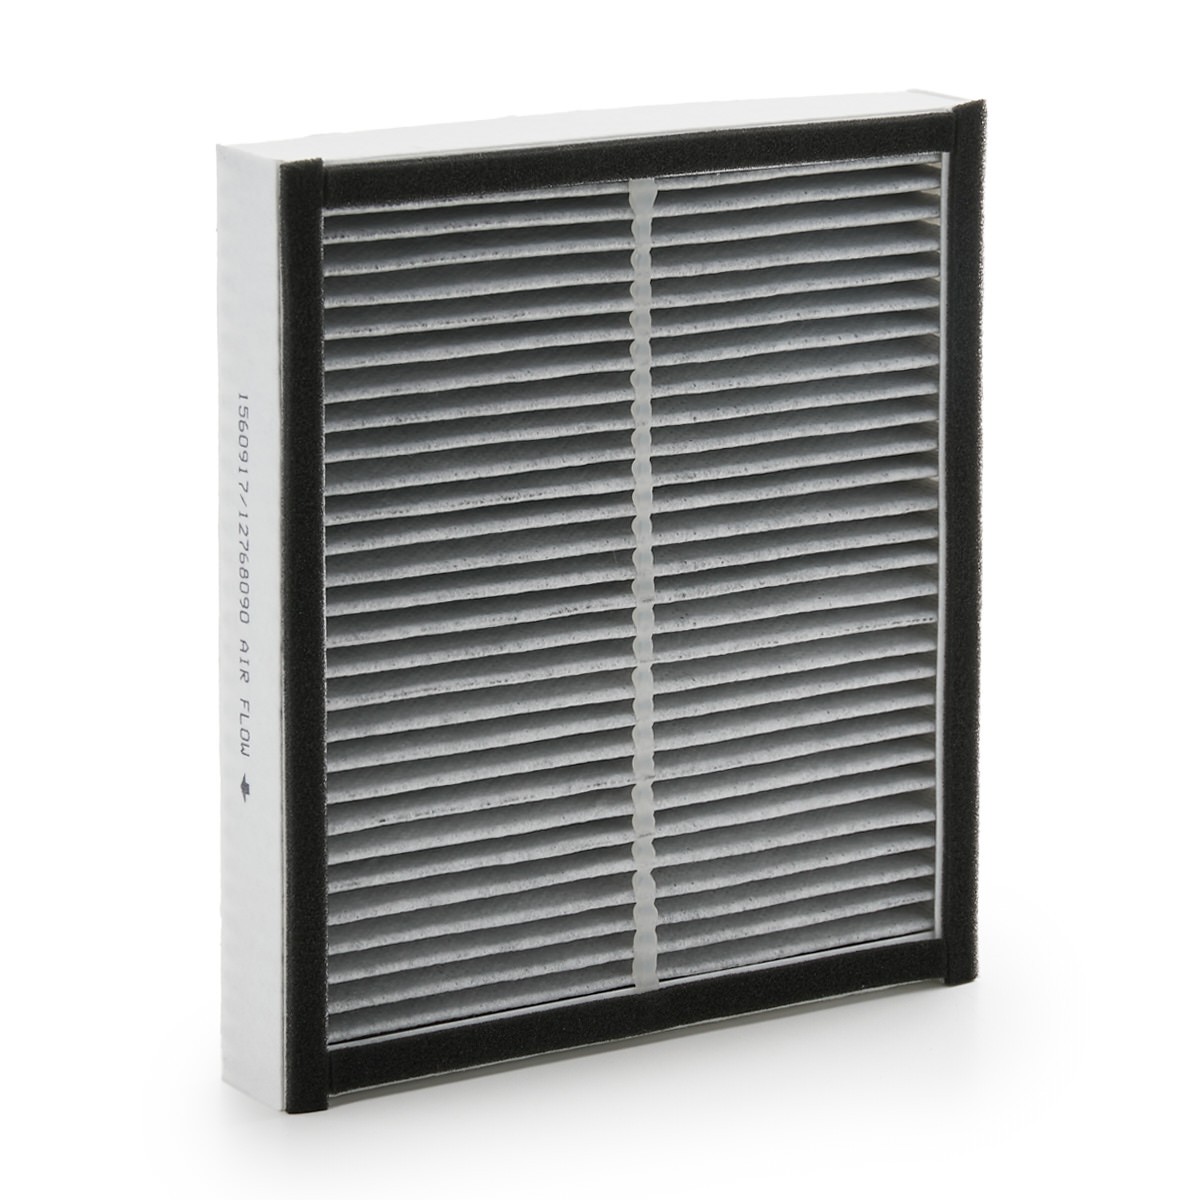 RIDEX 424I0472 Air conditioner filter Activated Carbon Filter, 228,5 mm x 200 mm x 32 mm